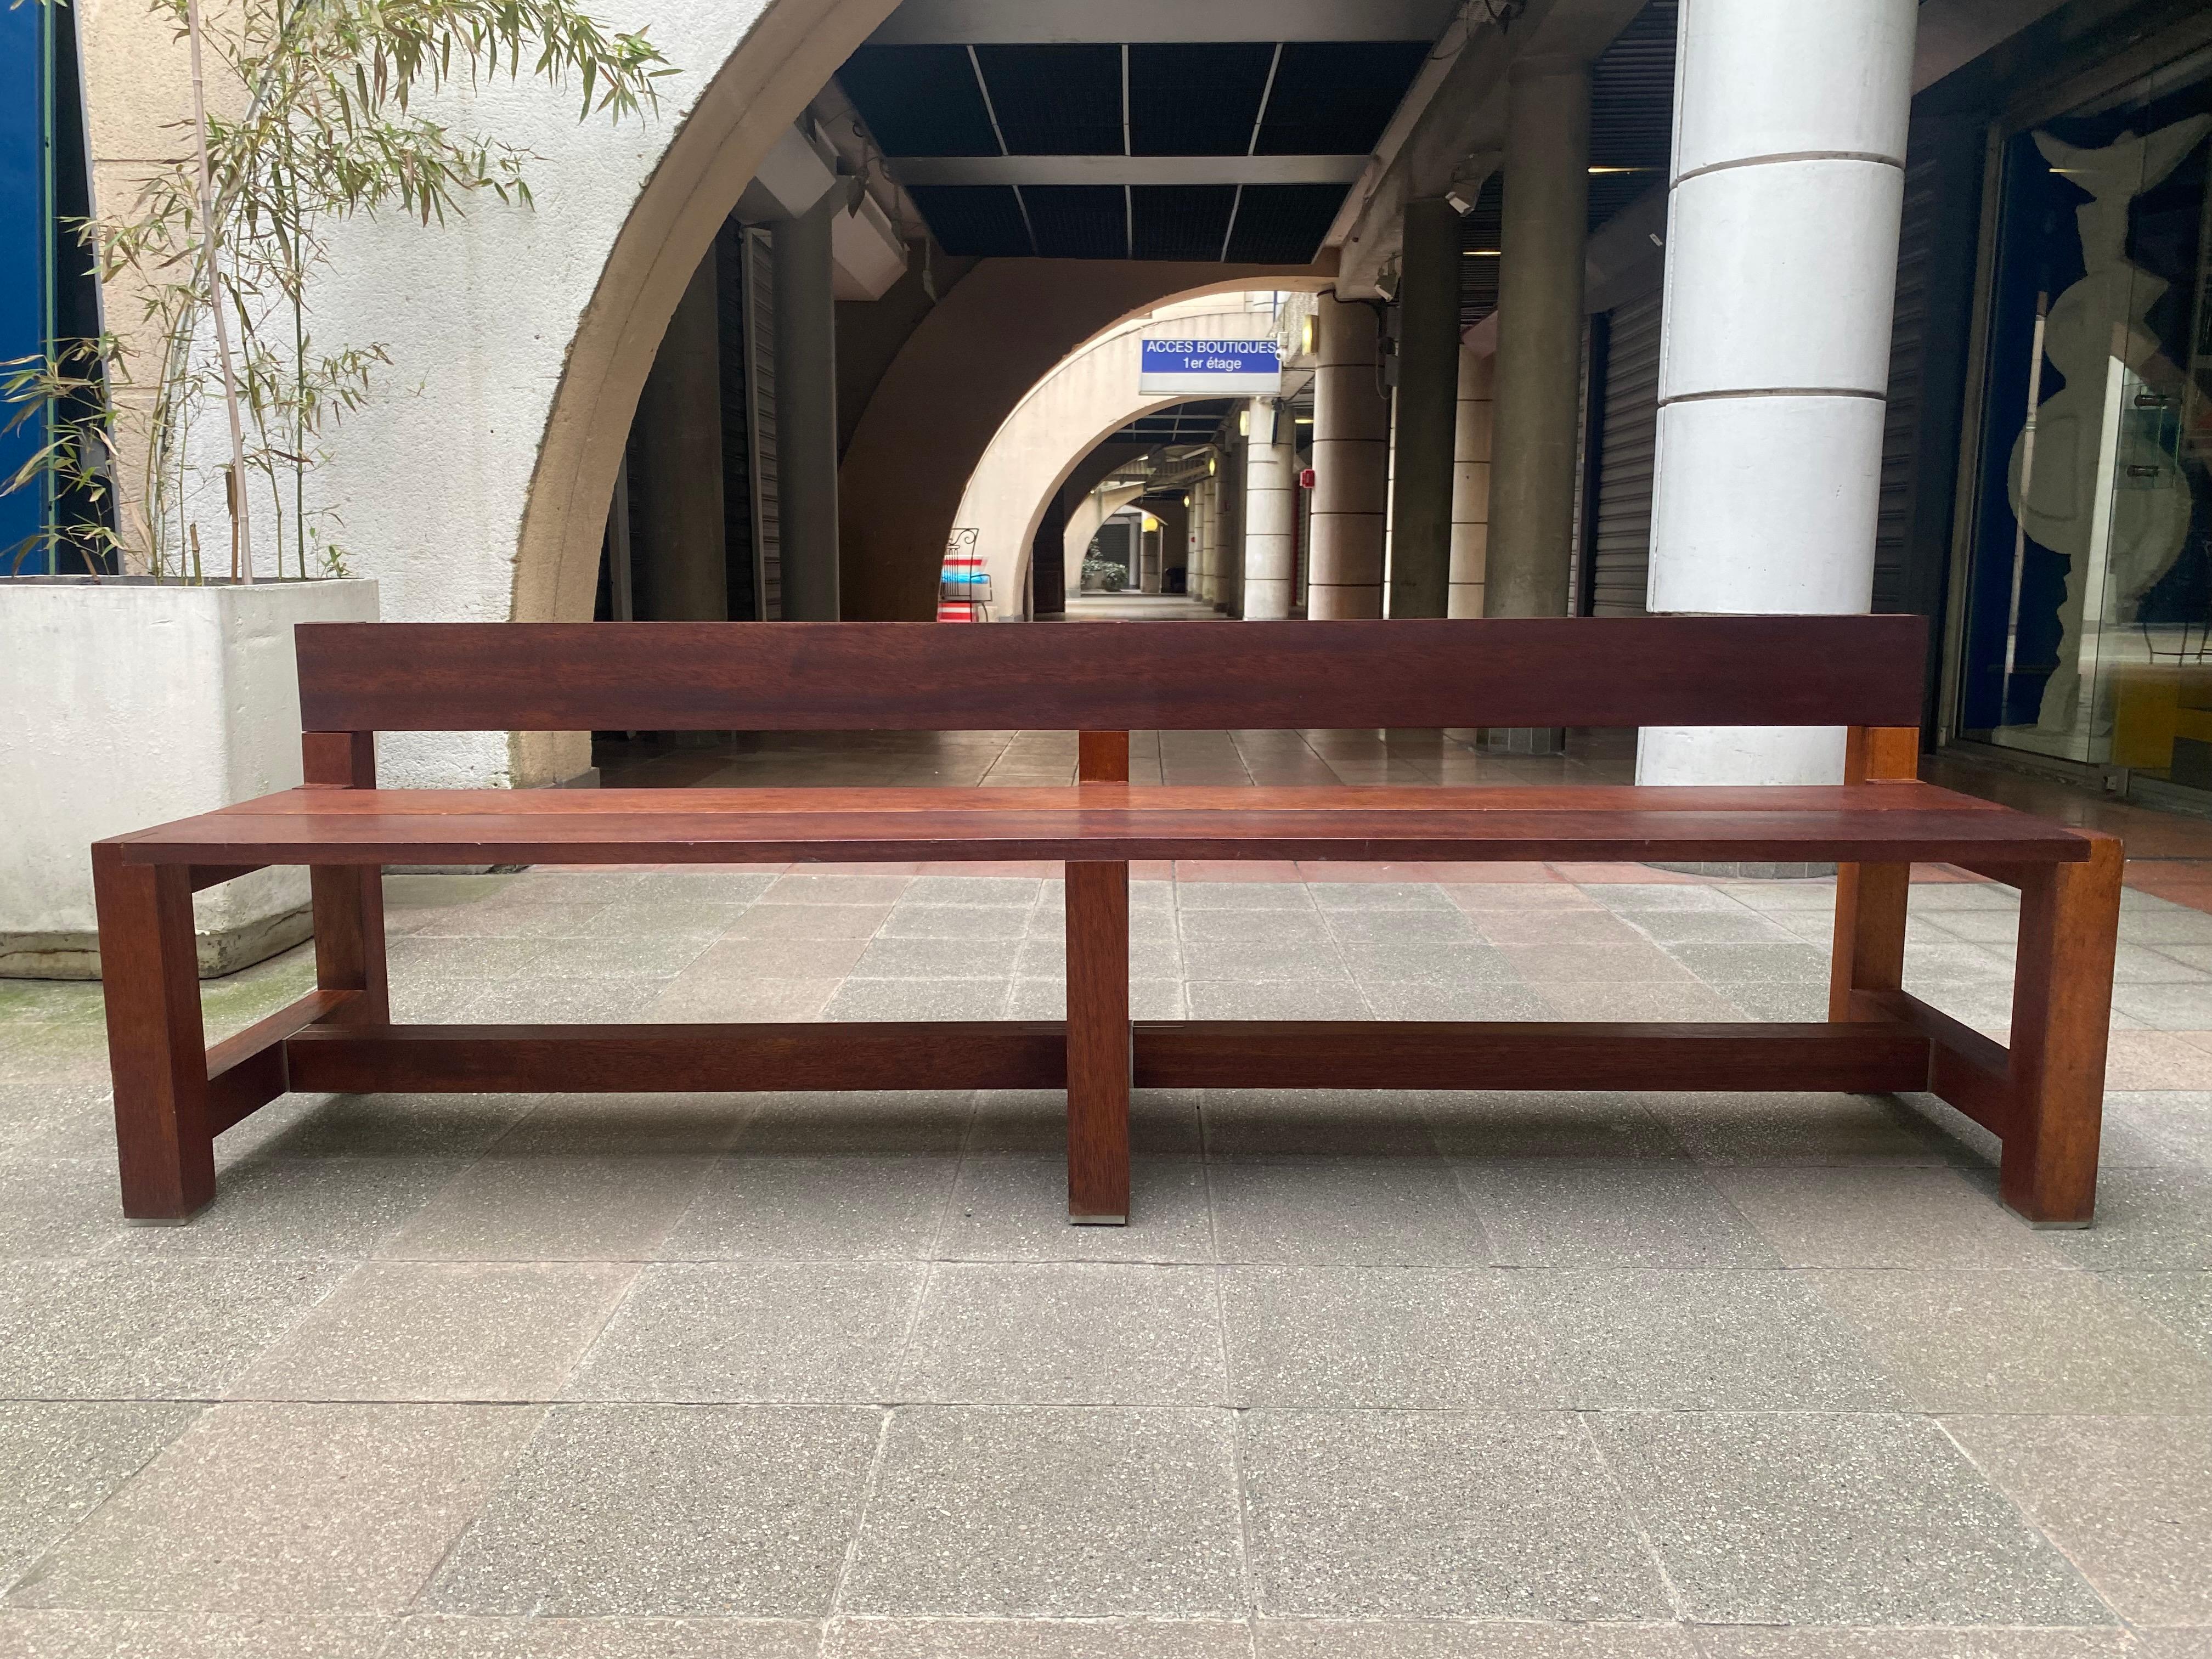 Claire Bataille and Paul Ibens -
Pair of benches - Feld Edition - Circa 2020.
Cedar and steel.
Superb workmanship.
Measures: W 220 x H 86.5 x D 55 cms
Rare and in very good condition

Claire Bataille (born in 1940) and Paul ibens (born in